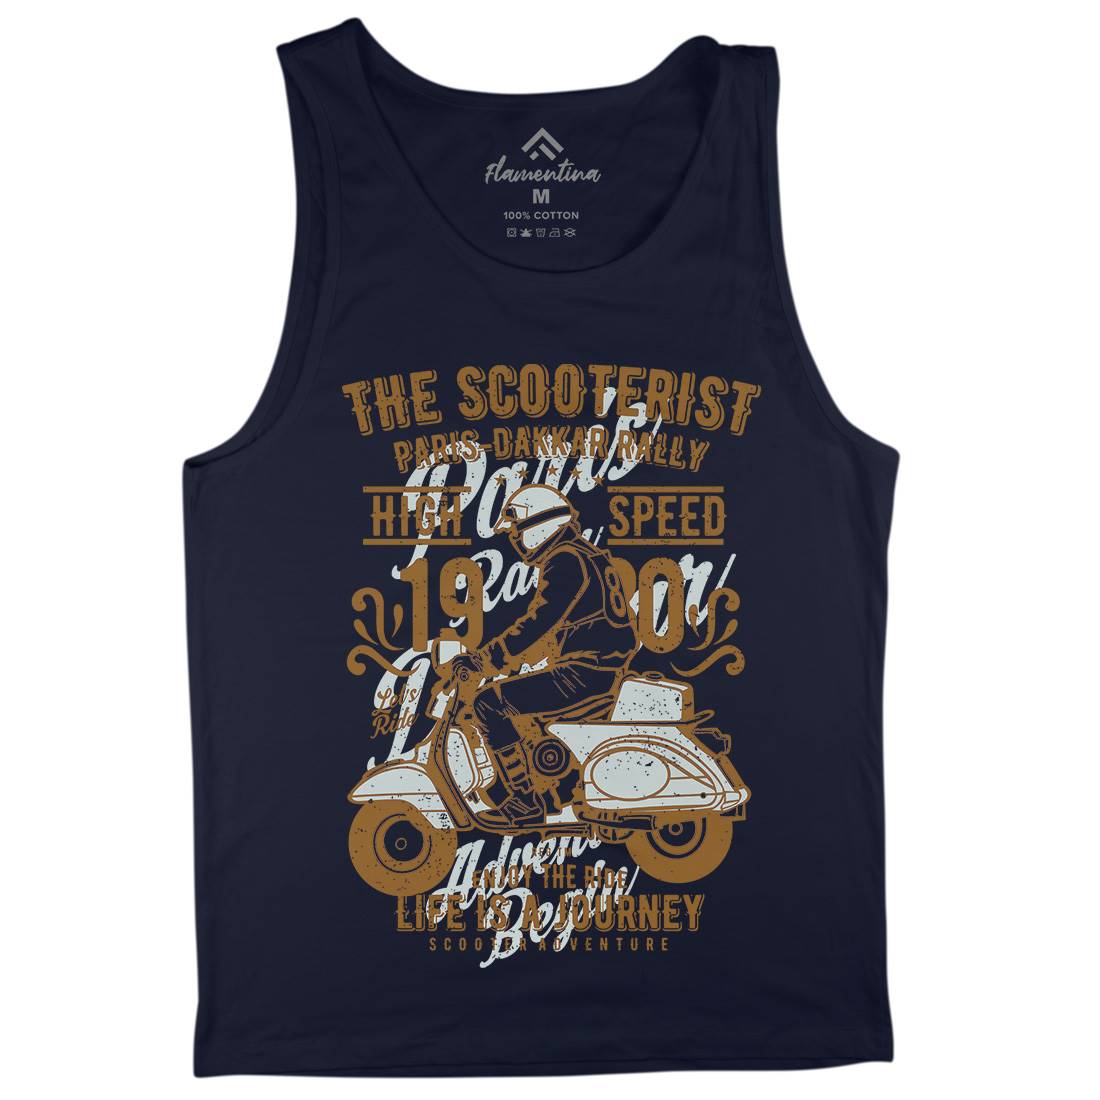 Scooterist 1980 Mens Tank Top Vest Motorcycles A774